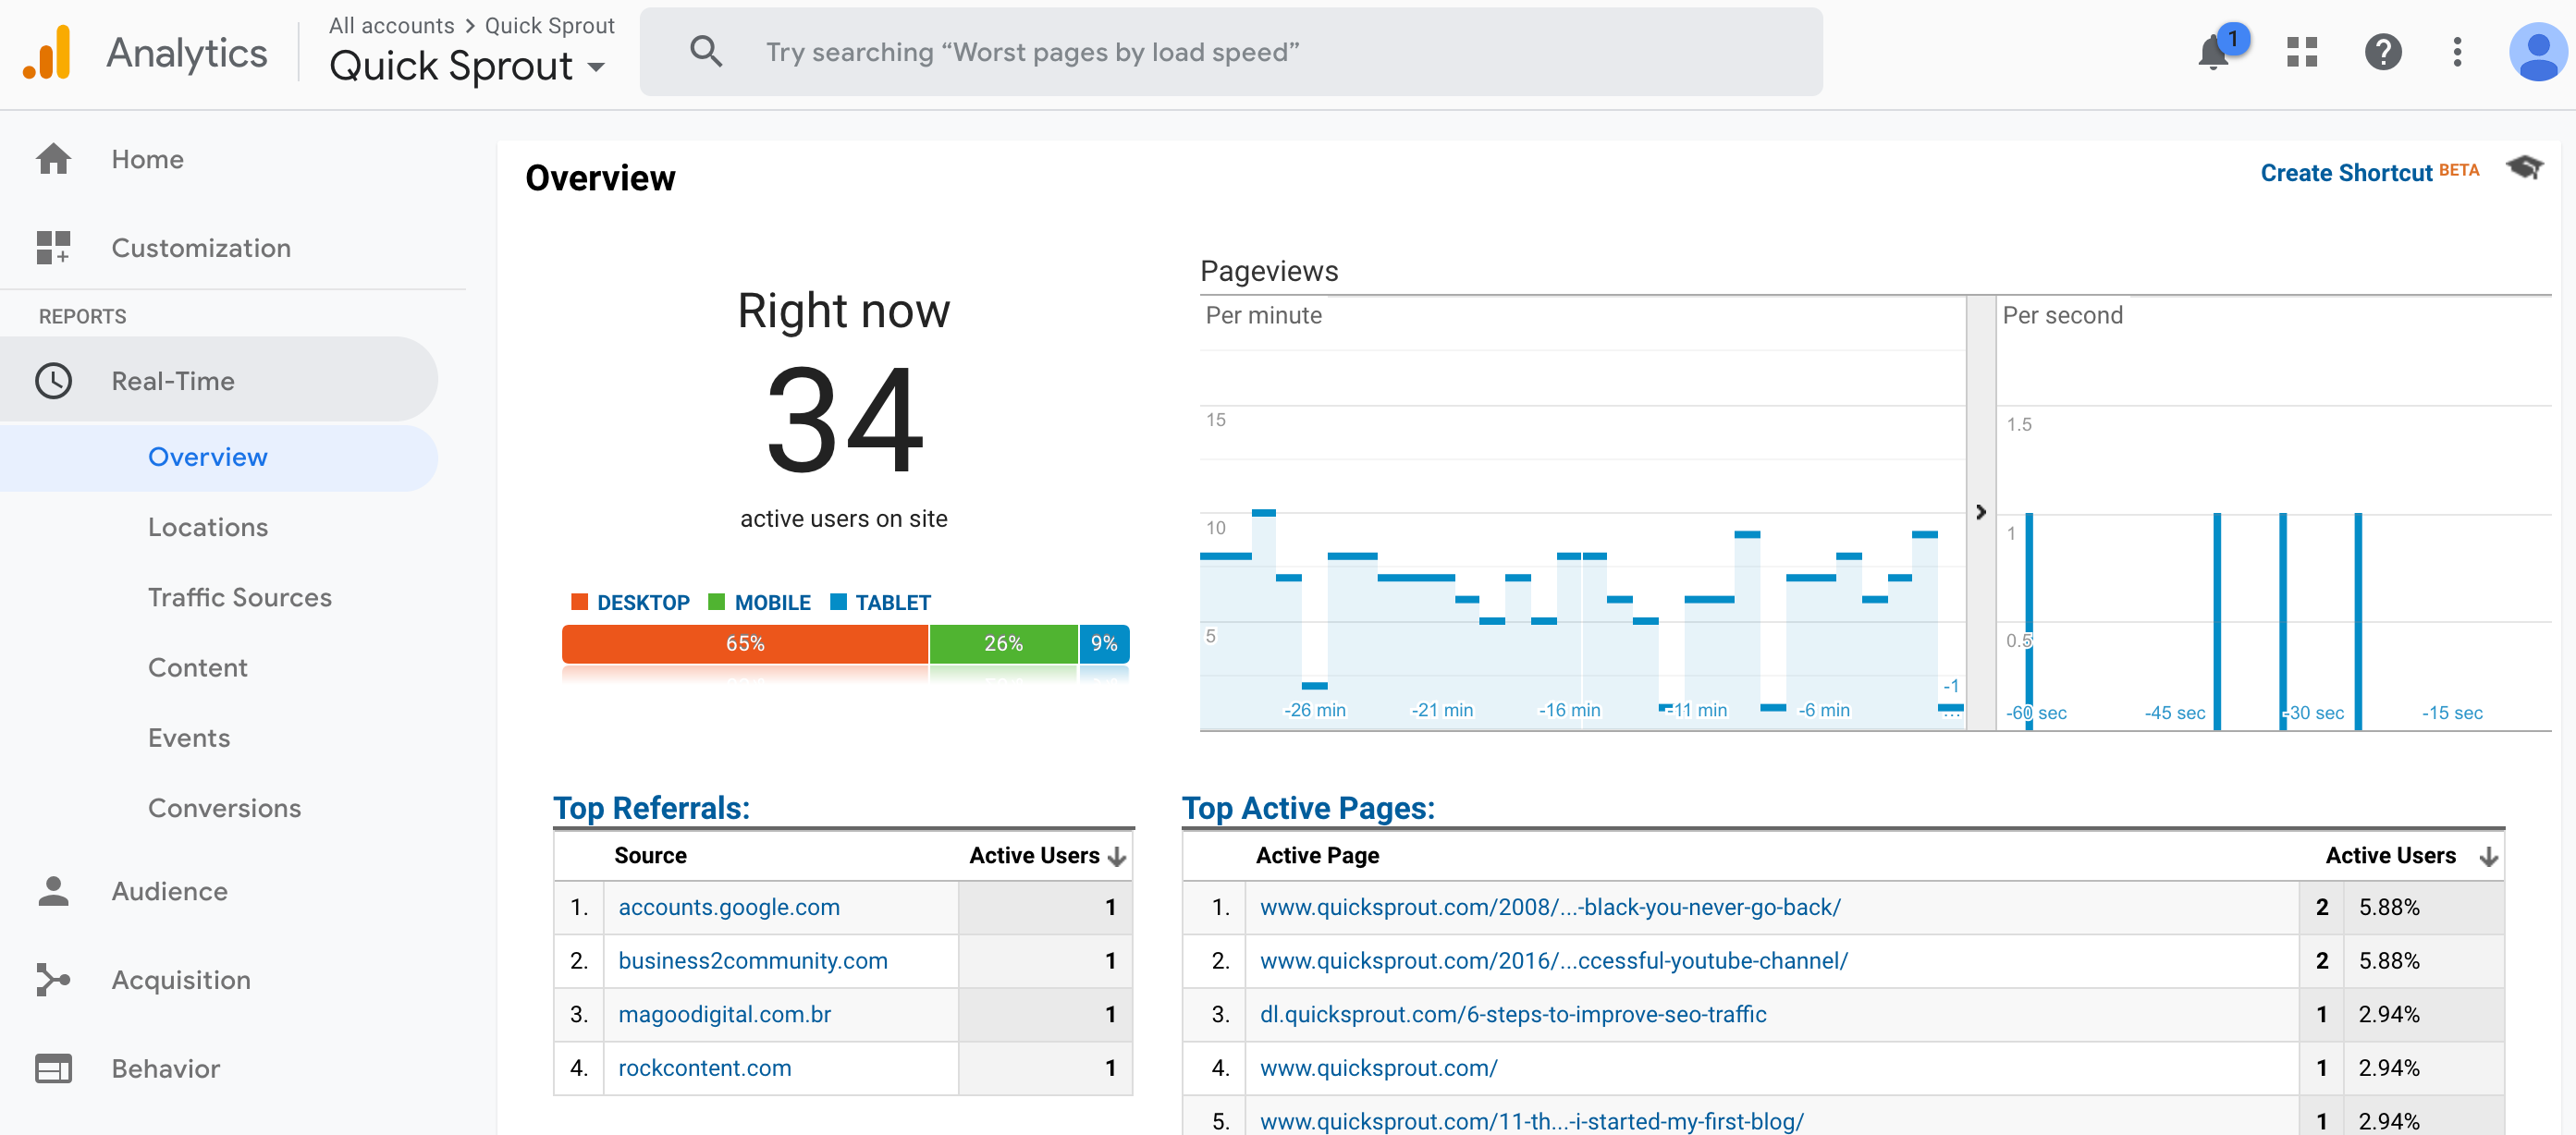 Google Analytics Overview Report in Real-Time Reports